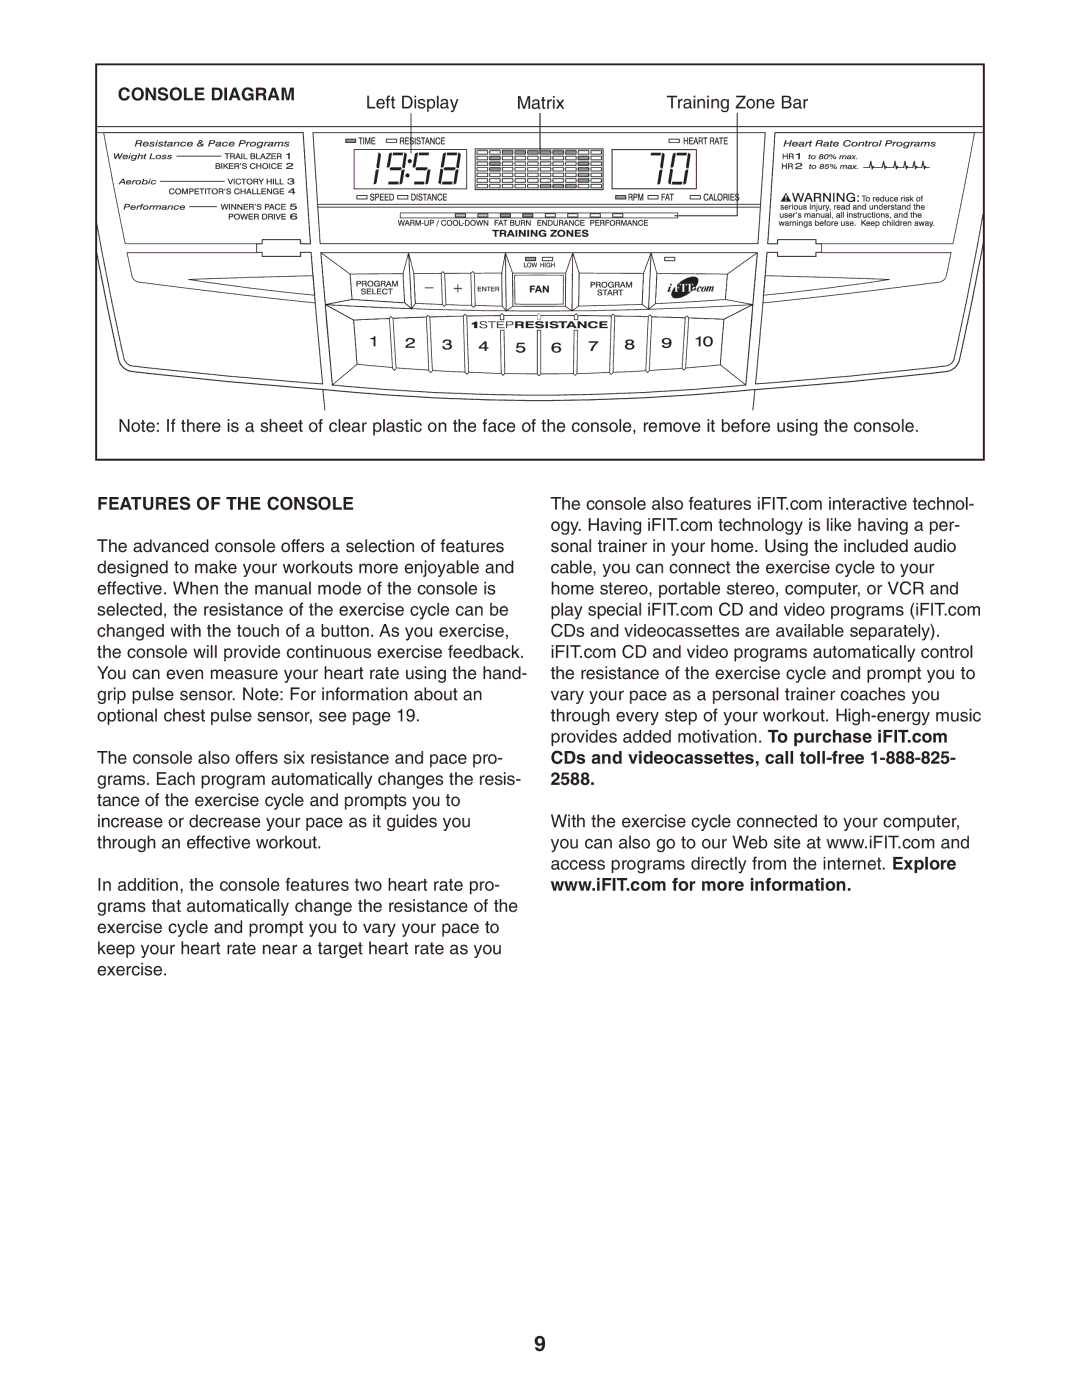 NordicTrack NTC05940 user manual Console Diagram, Features of the Console, CDs and videocassettes, call toll-free 1-888-825 